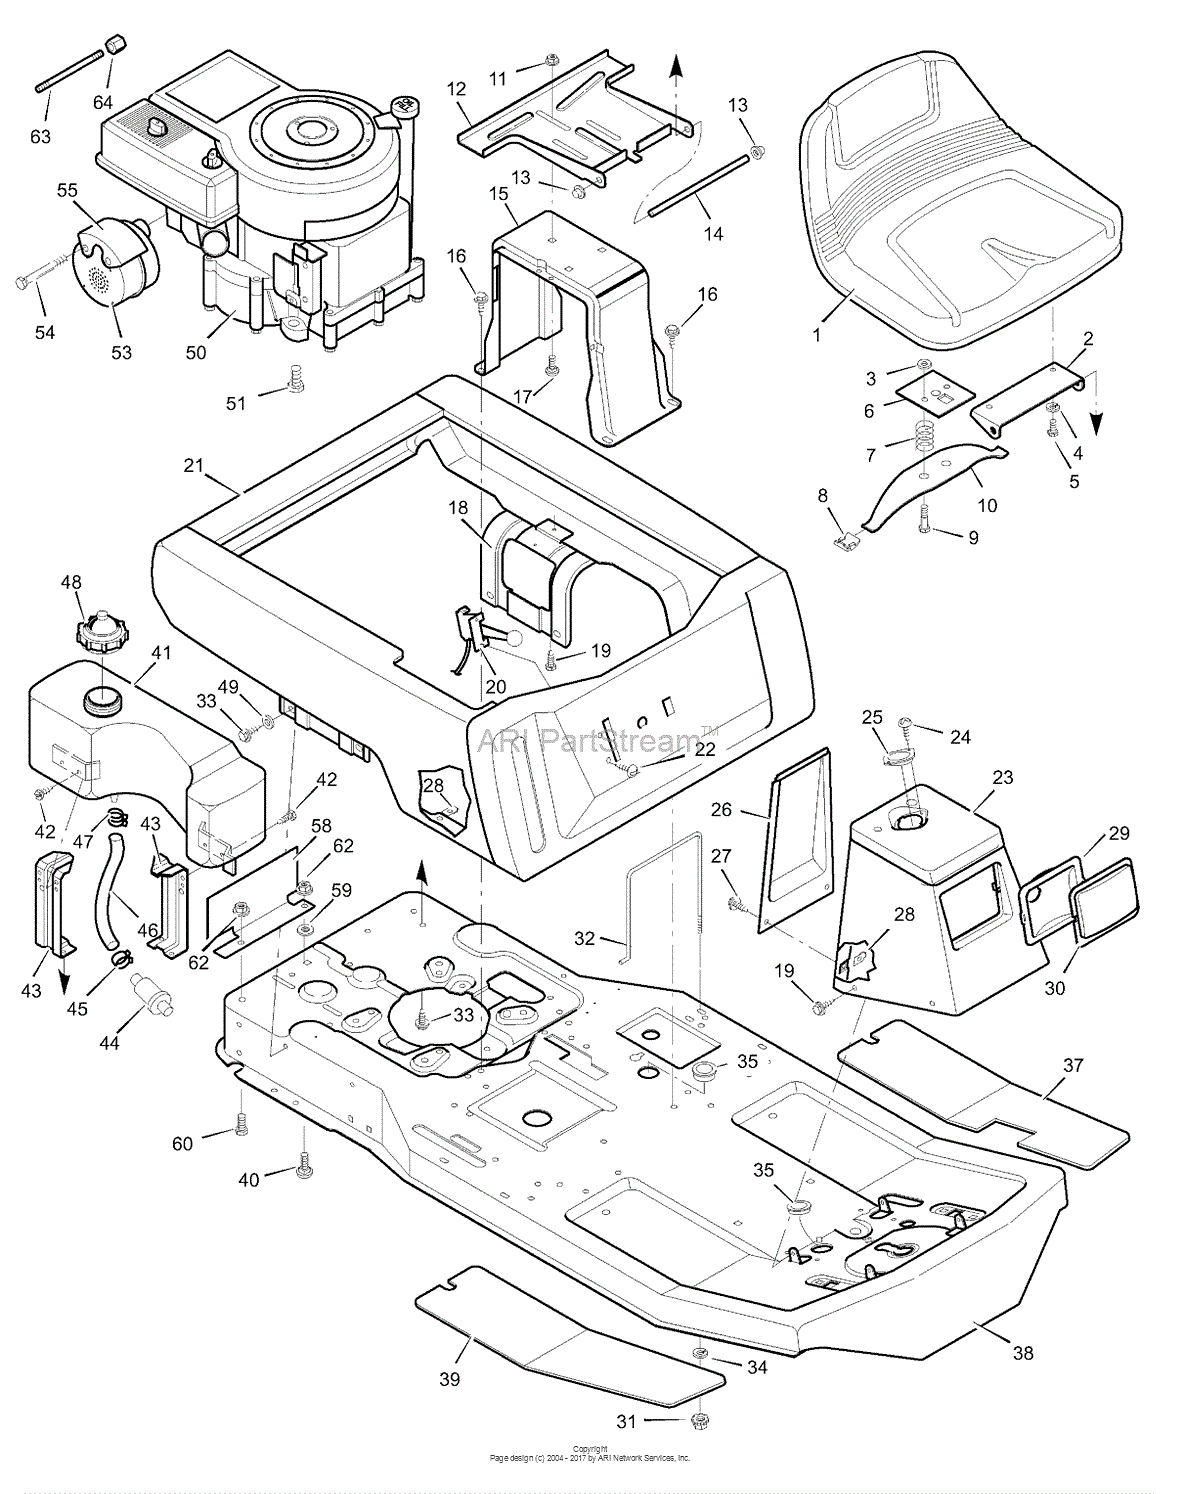 Murray 30577x8A - Rear Engine Rider (1999) Parts Diagram for Body Chassis